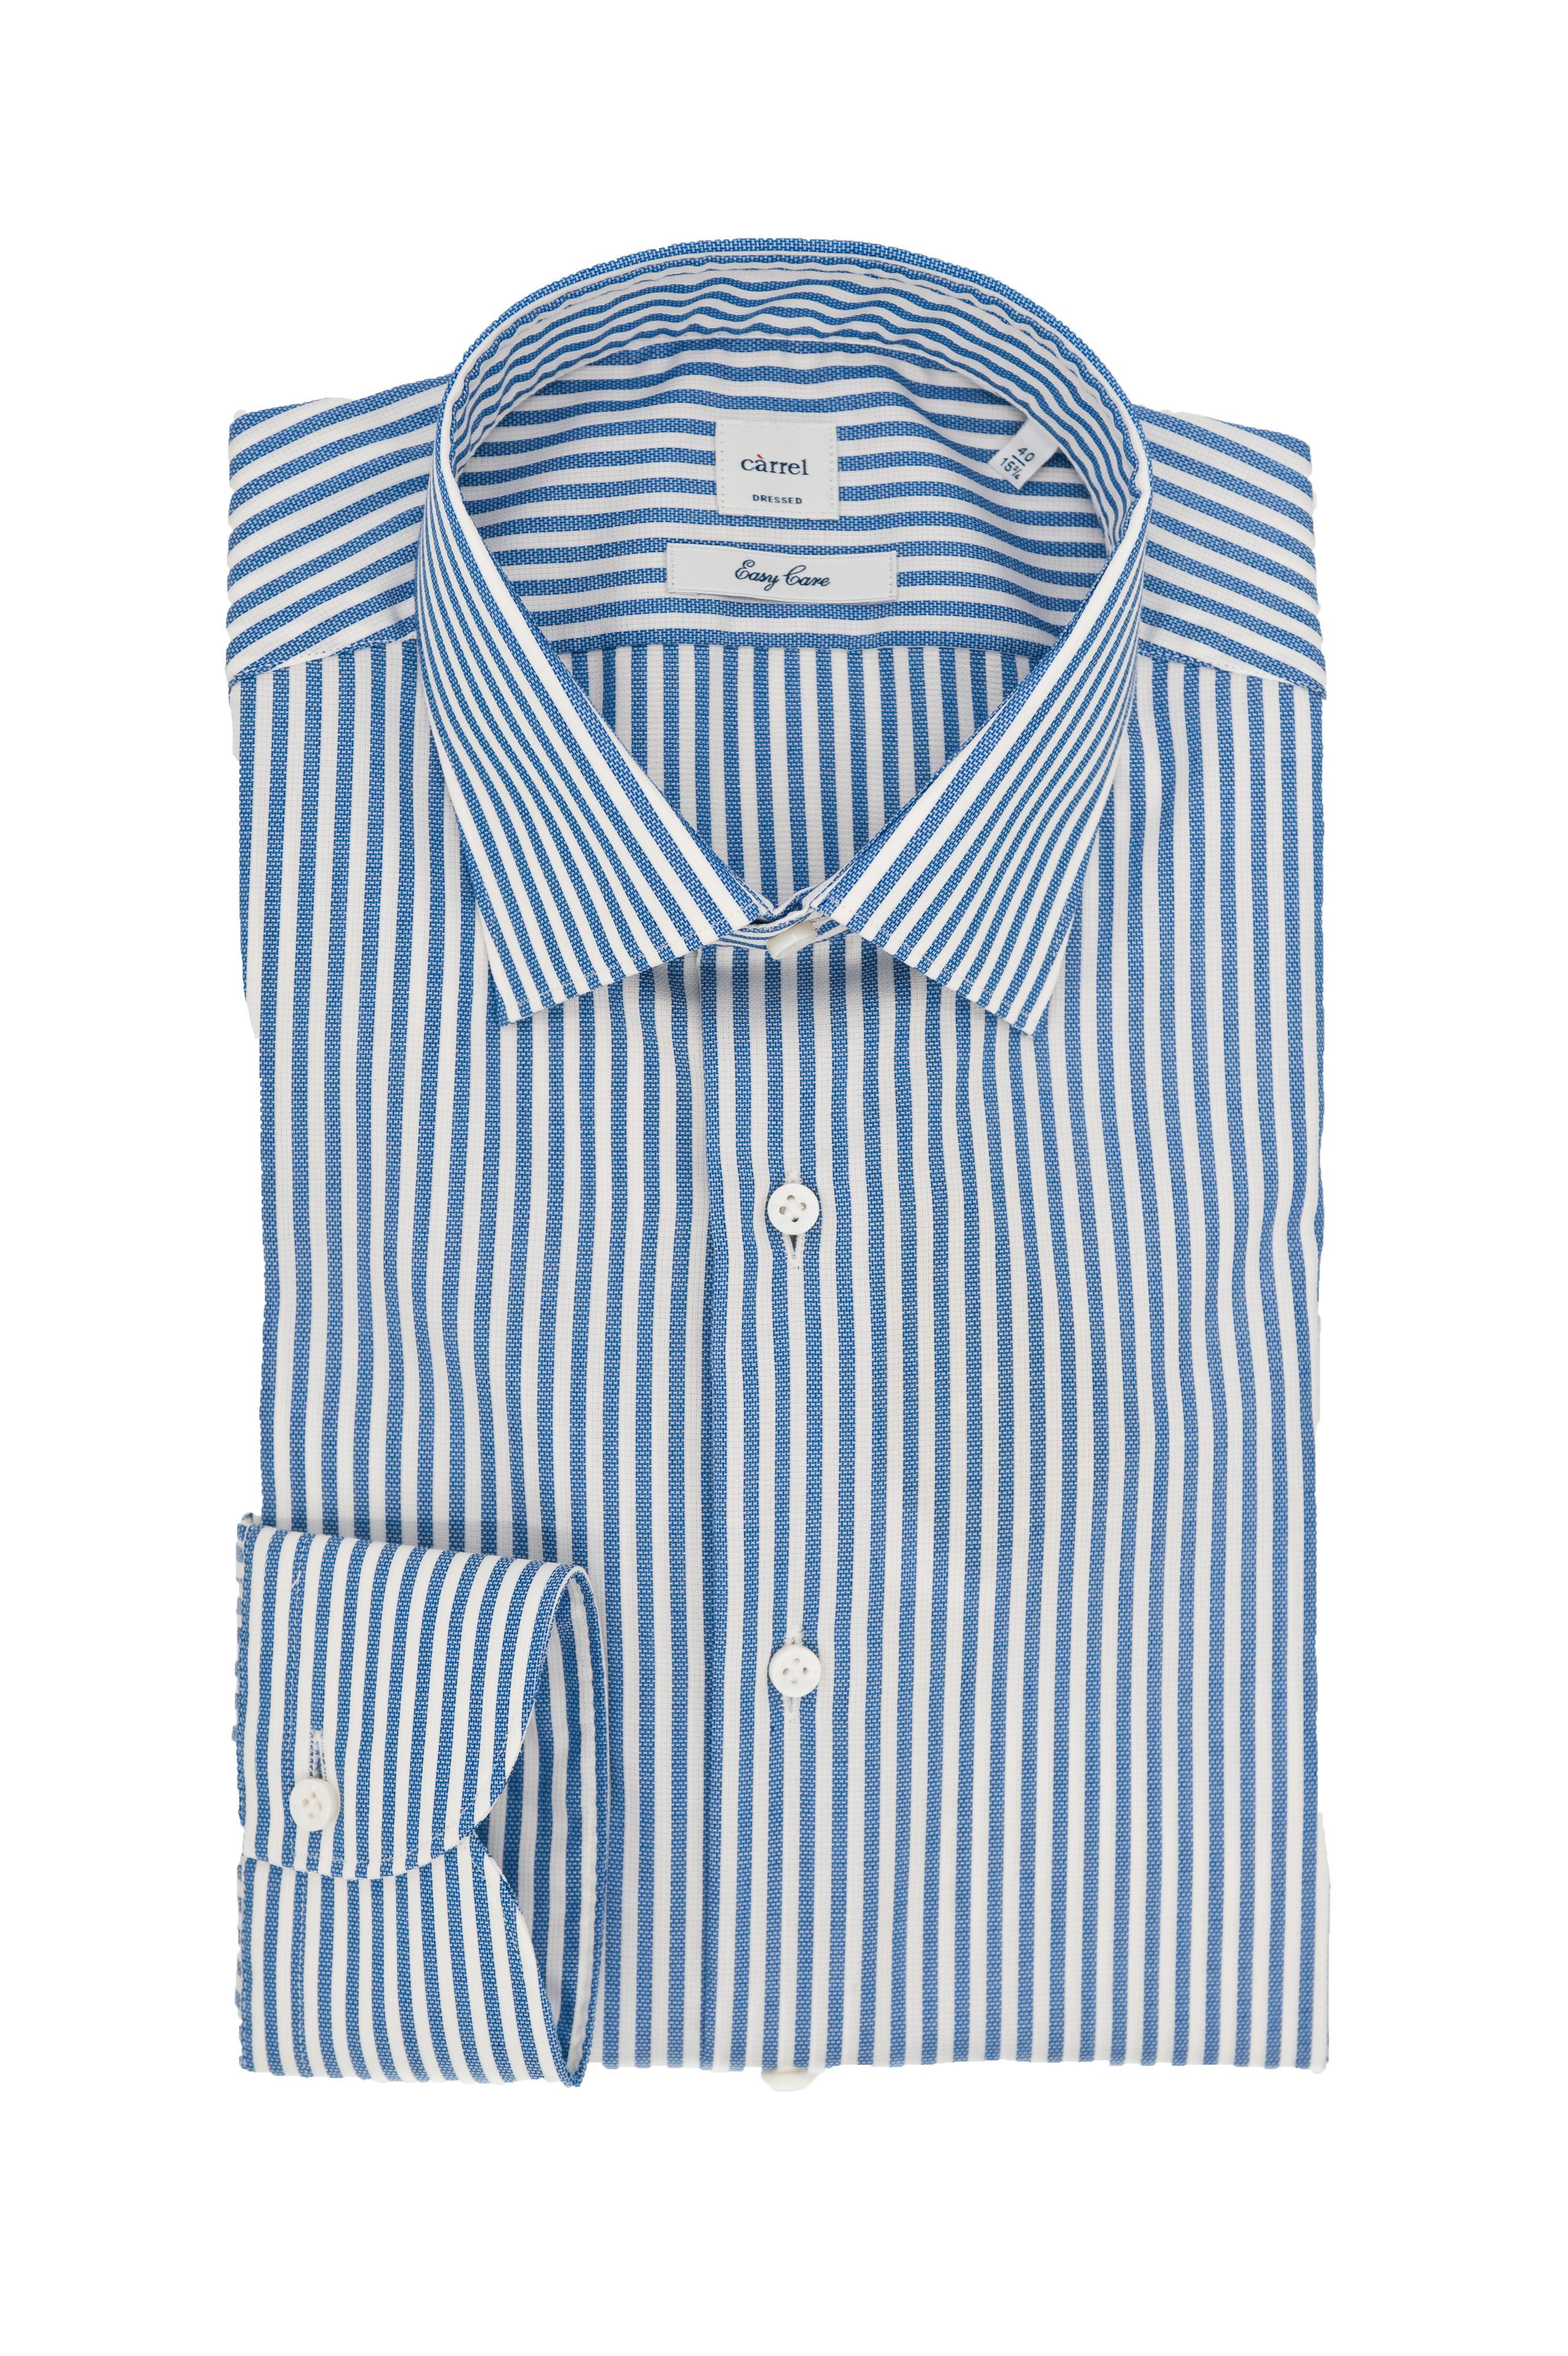 Picture of carrel Light blue and white Striped shirt 